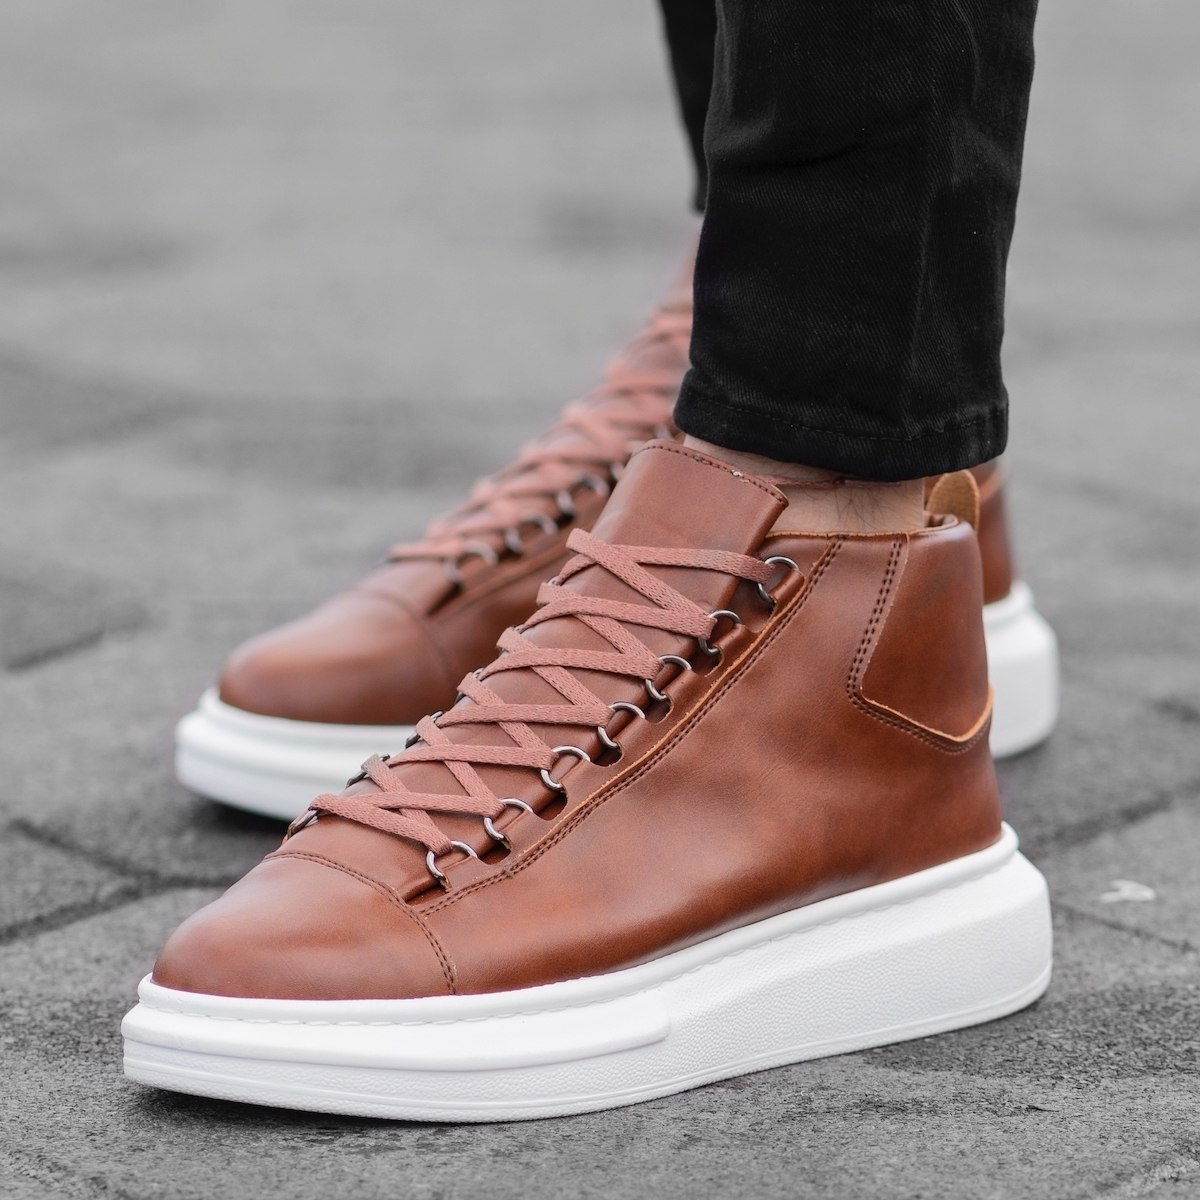 Hype Sole Mox High Top Sneakers in Taupe | Martin Valen